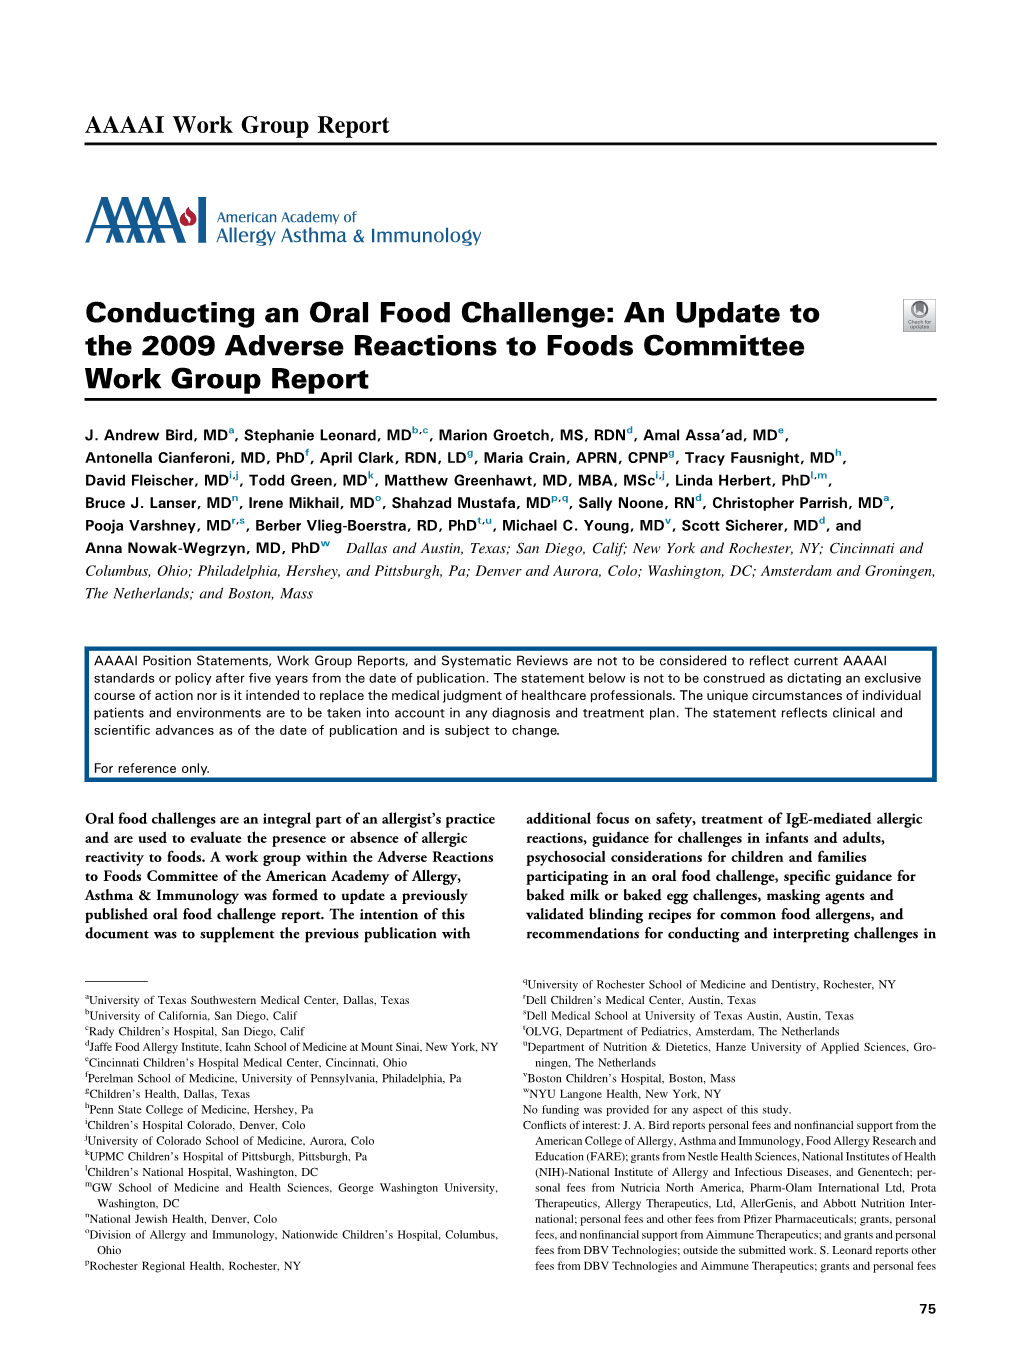 Conducting an Oral Food Challenge: an Update to the 2009 Adverse Reactions to Foods Committee Work Group Report